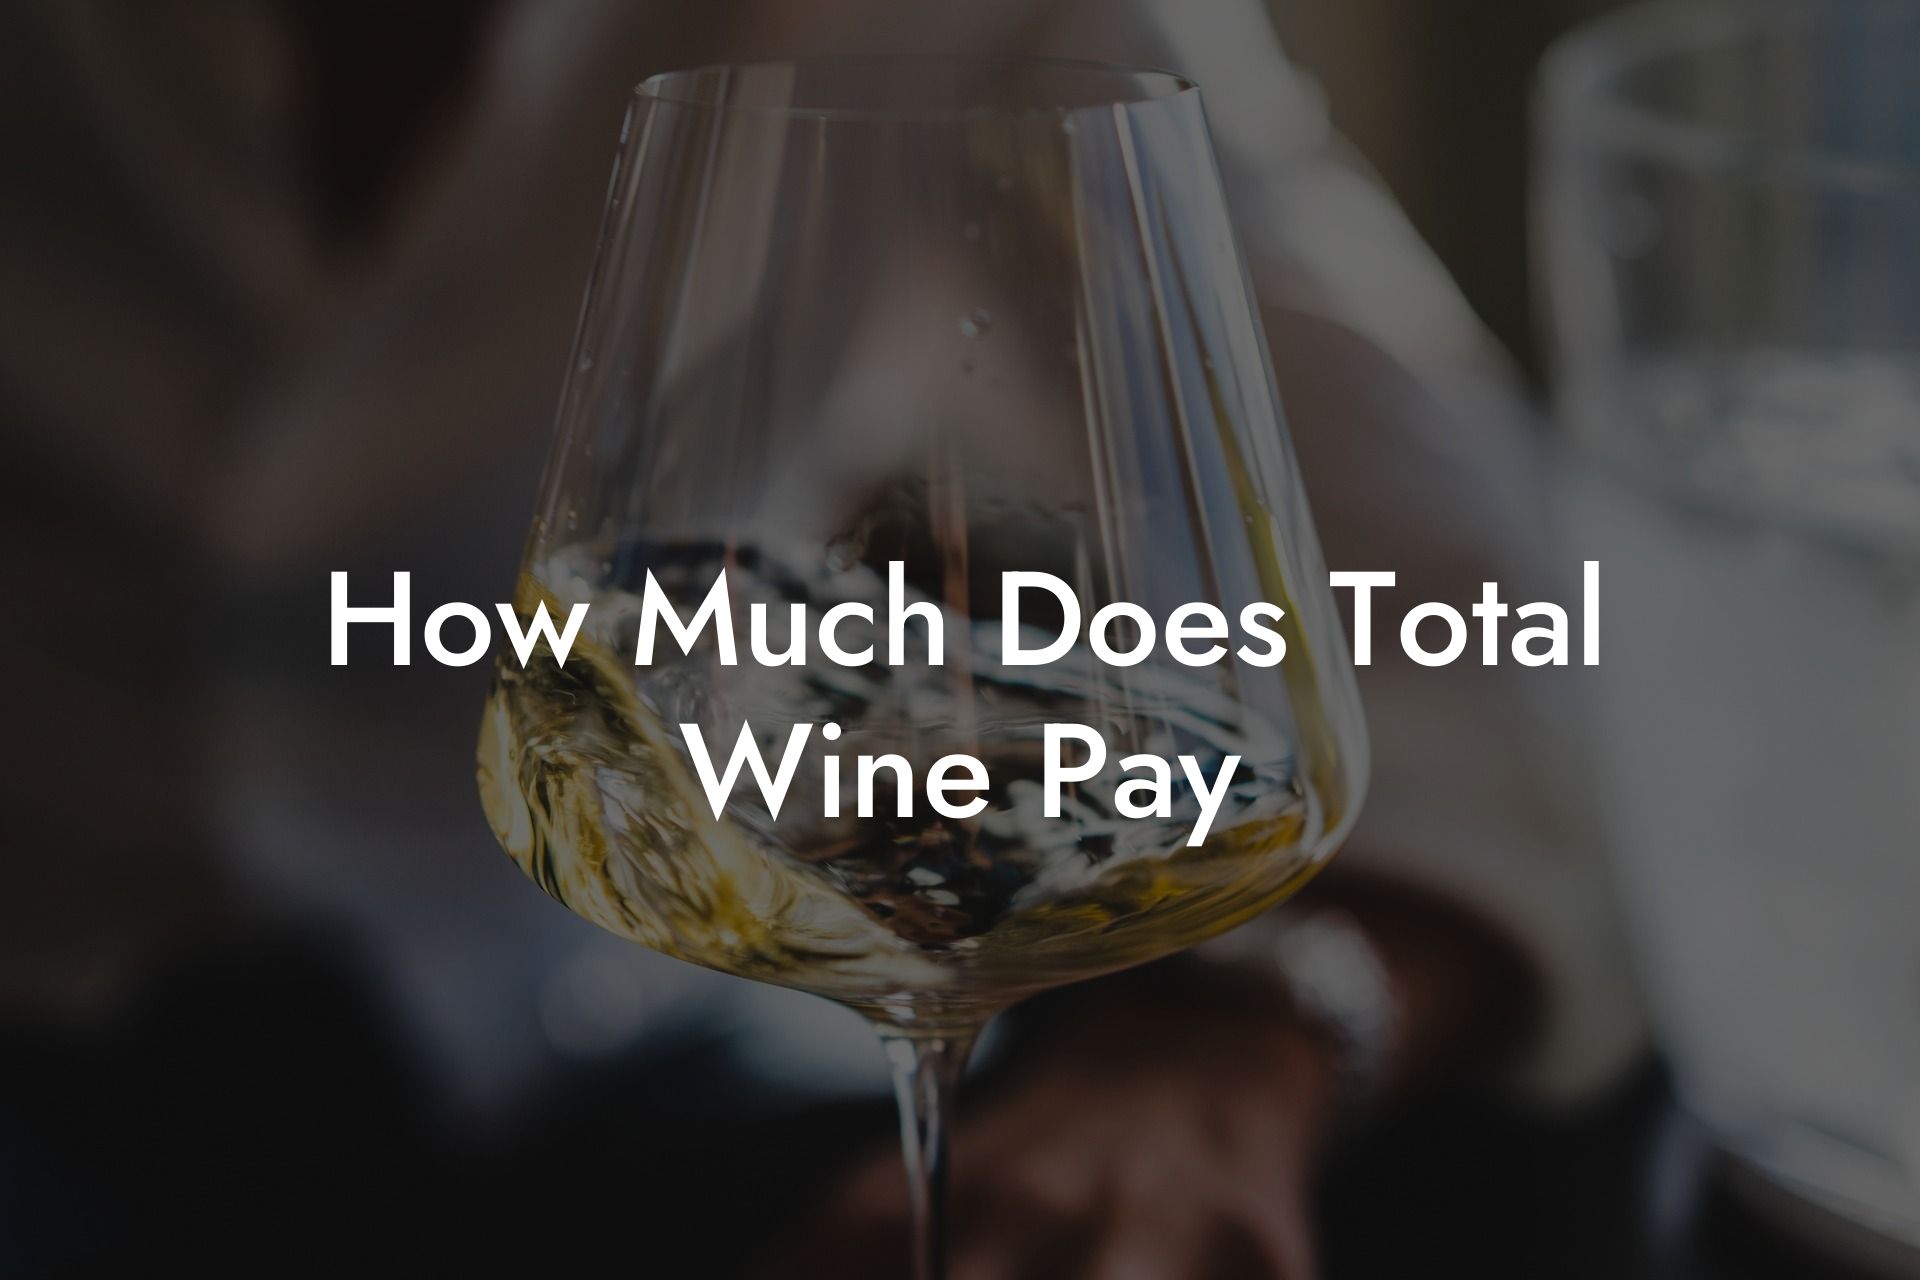 How Much Does Total Wine Pay